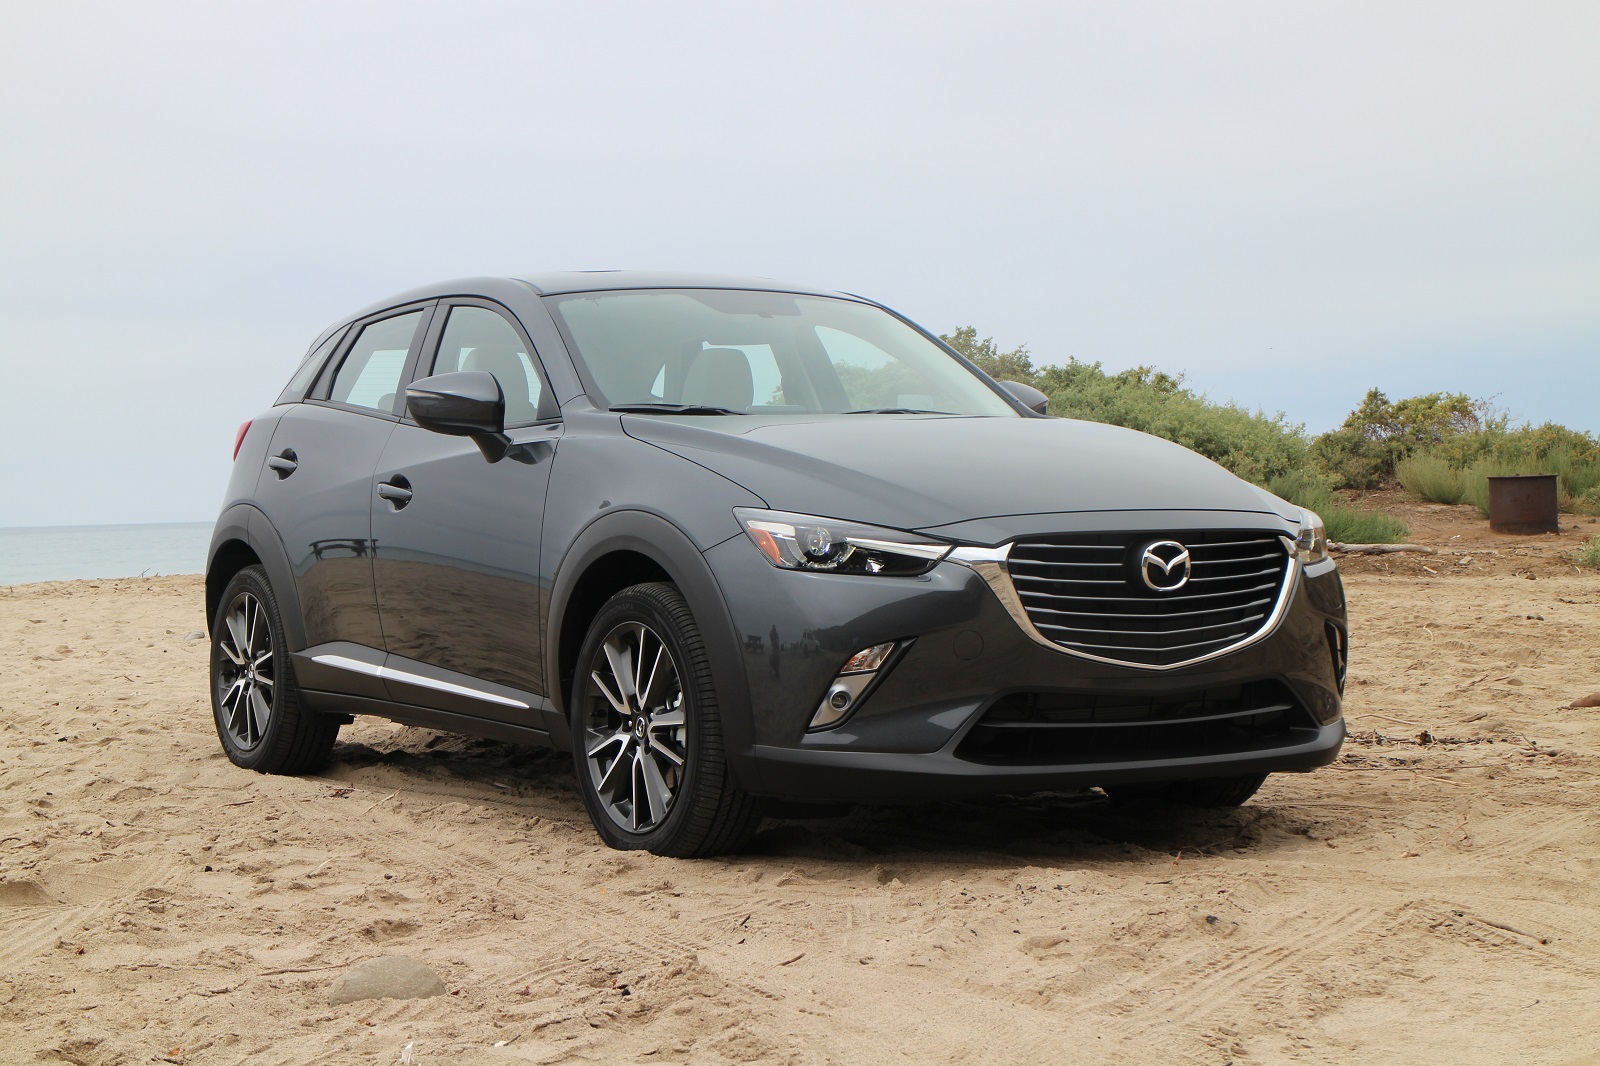 2016 Mazda CX-3: First Drive Of 31-MPG Small Sporty Crossover